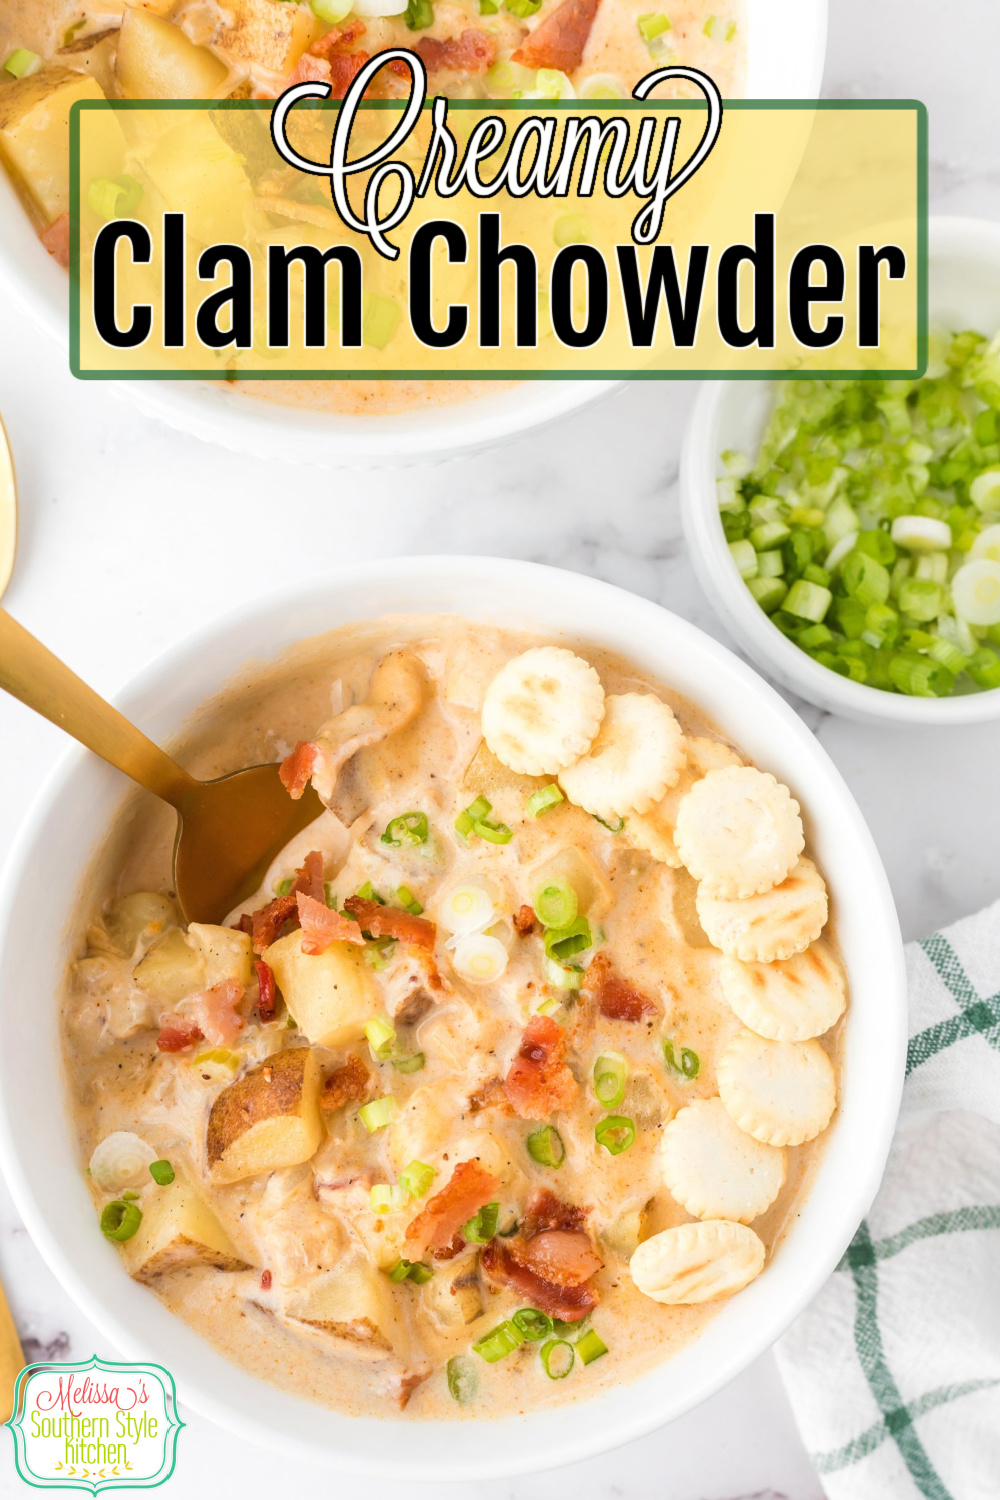 Treat the family to a steamy bowl of this creamy Southern style Clam Chowder at home #clamchowder #southernstyle #southernchowderrecipes #easyclamchowder #clamsrecipes #seafoodchowder #clamchowderrecipe via @melissasssk